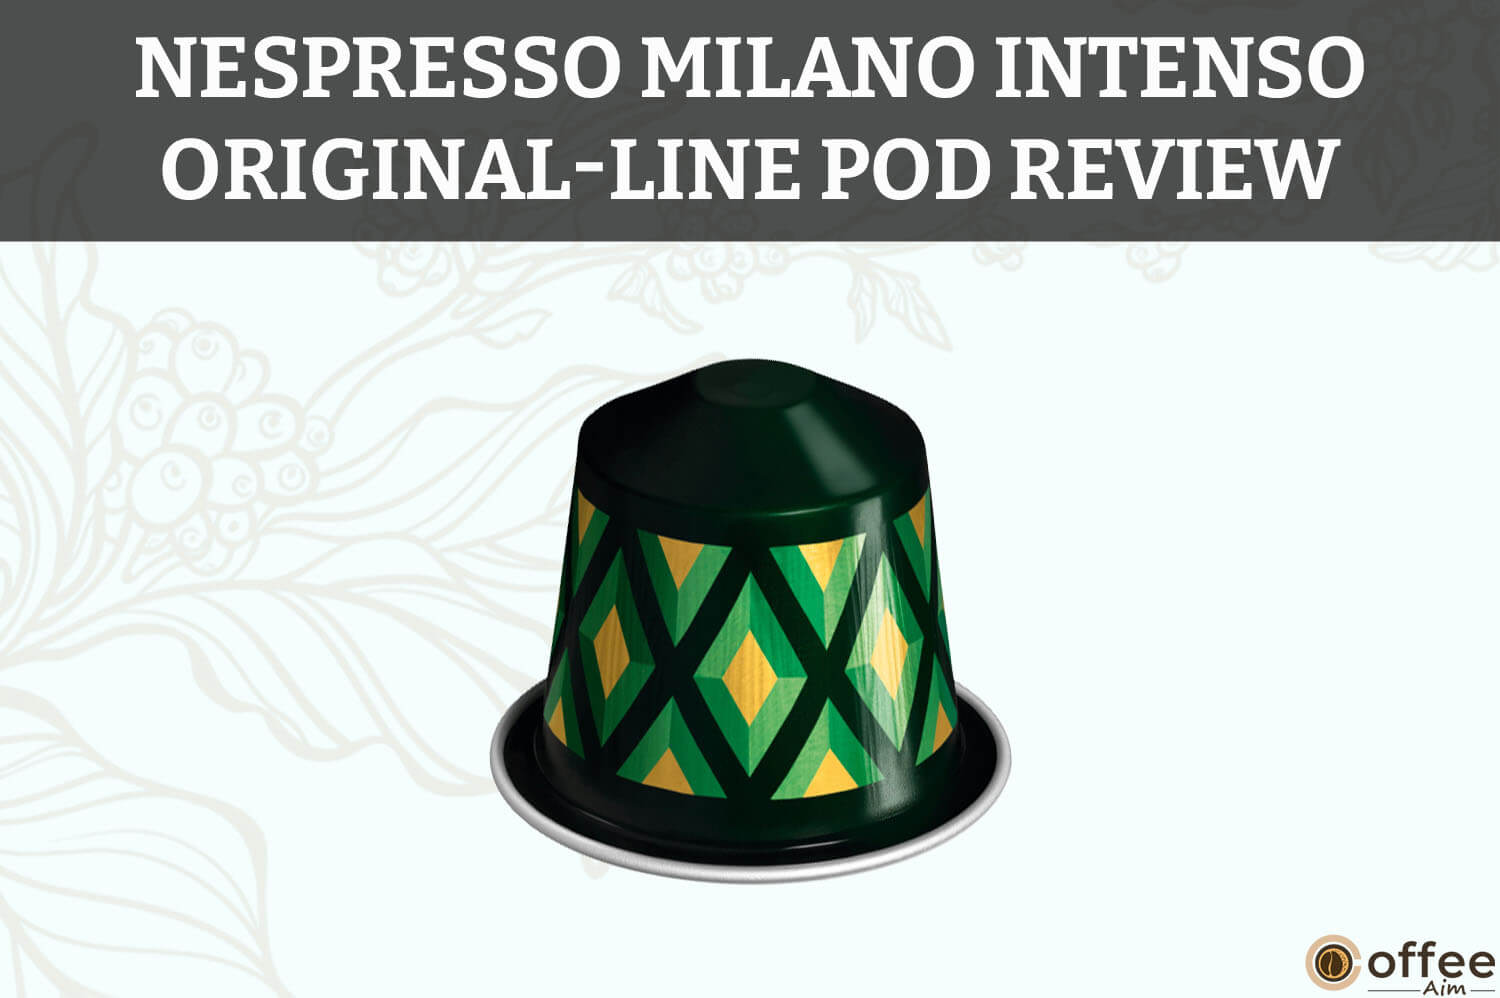 Featured image for the article "Nespresso Milano Intenso Original-Line Pod Review"